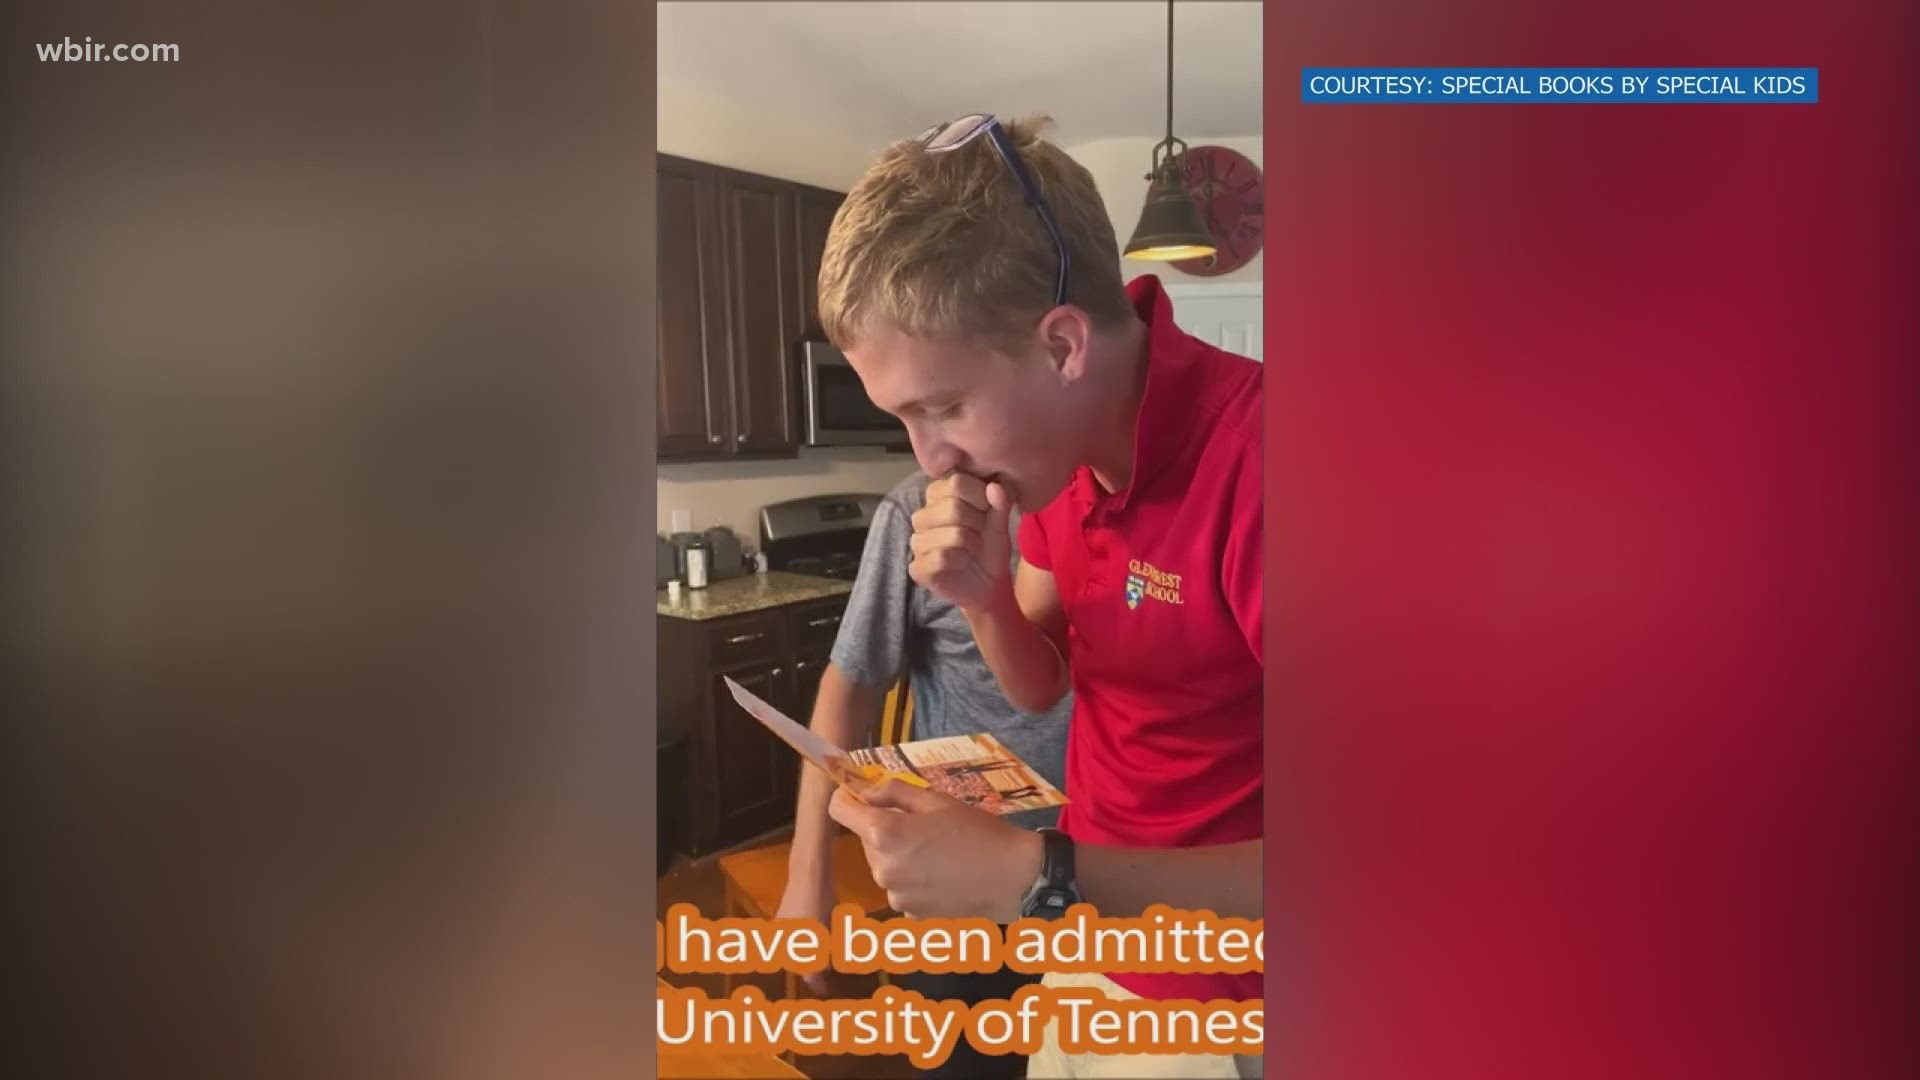 Doctors thought Kevin would never walk or talk, but now he's going to college.